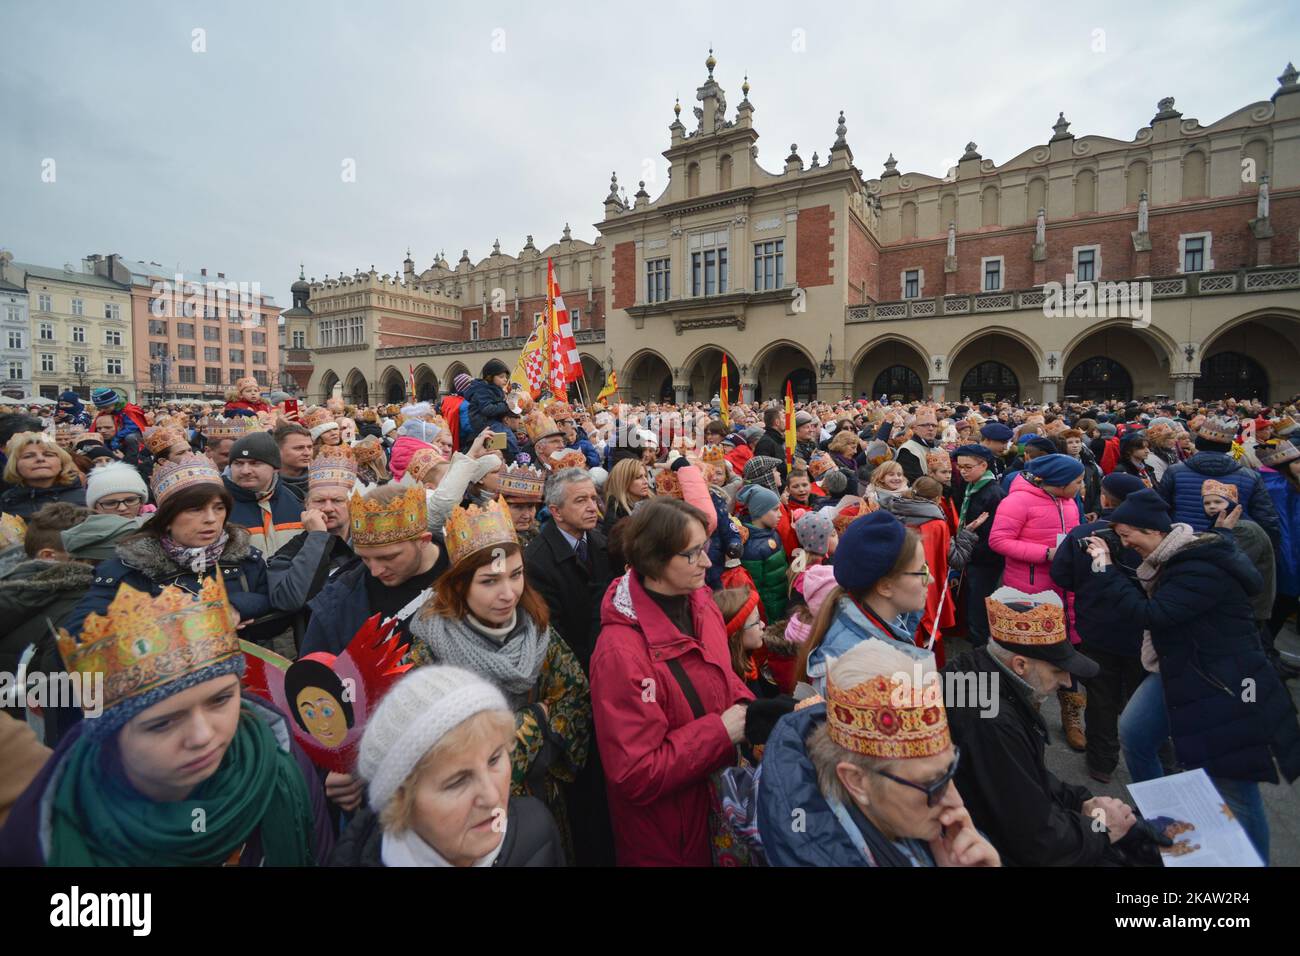 Thousands watch the annual 'Orszak Trzech Kroli' (English: the Three Kings procession) in Krakow, Poland on January 6, 2018. The traditional procession, which annually marks the end of the Christmas festivities, is a re-enactment of the journey of the Three Wise Men, Balthazar, Melchior and Gaspar, believed to have followed a bright star to offer gifts to the infant Jesus in Bethlehem. (Photo by Artur Widak/NurPhoto)  Stock Photo